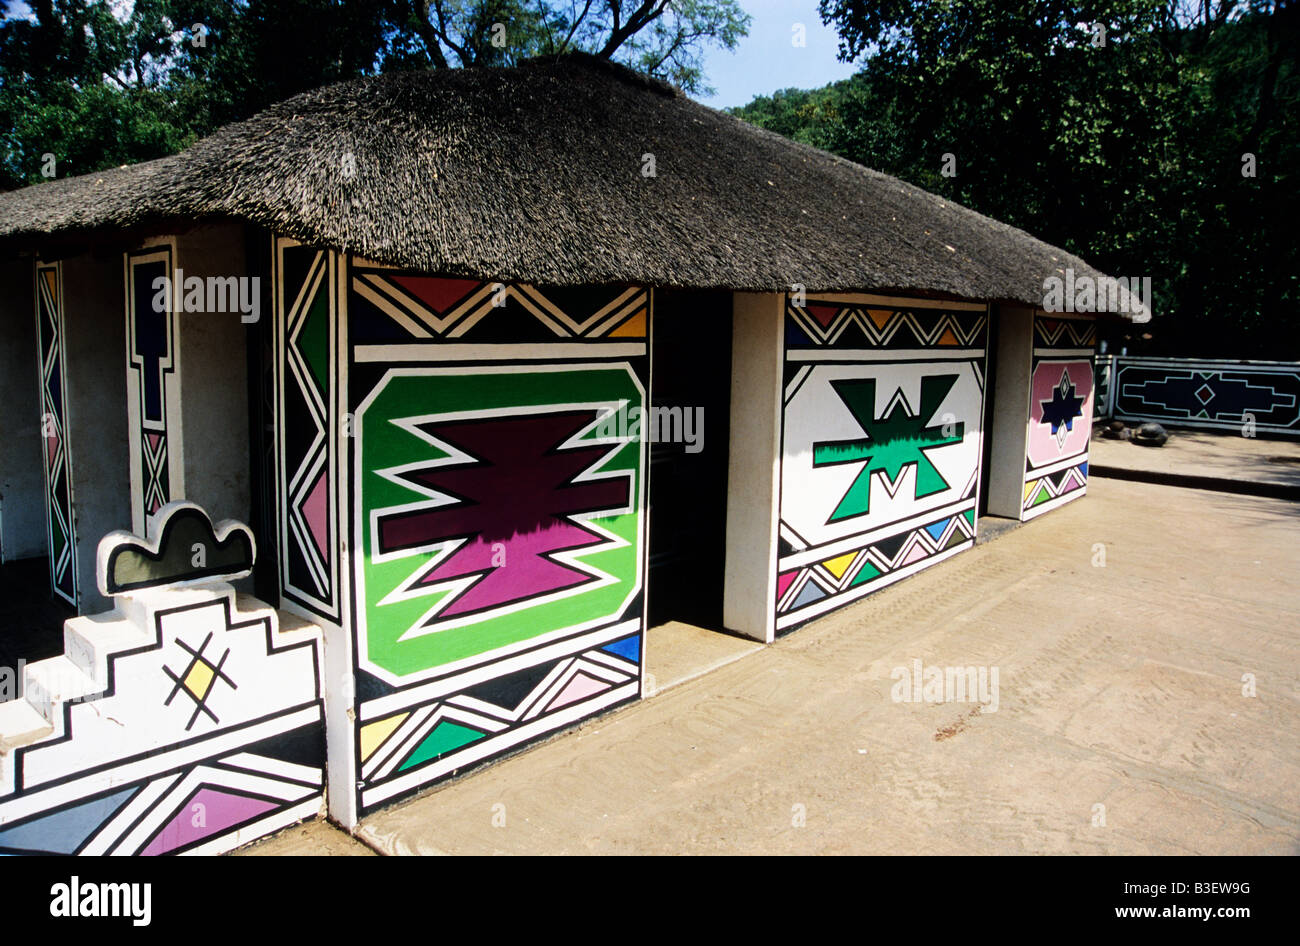 House, housing, colourful geometric shapes, patterns, traditional Ndebele hut, ethnic, culture, travel, building, South Africa, theme village Stock Photo